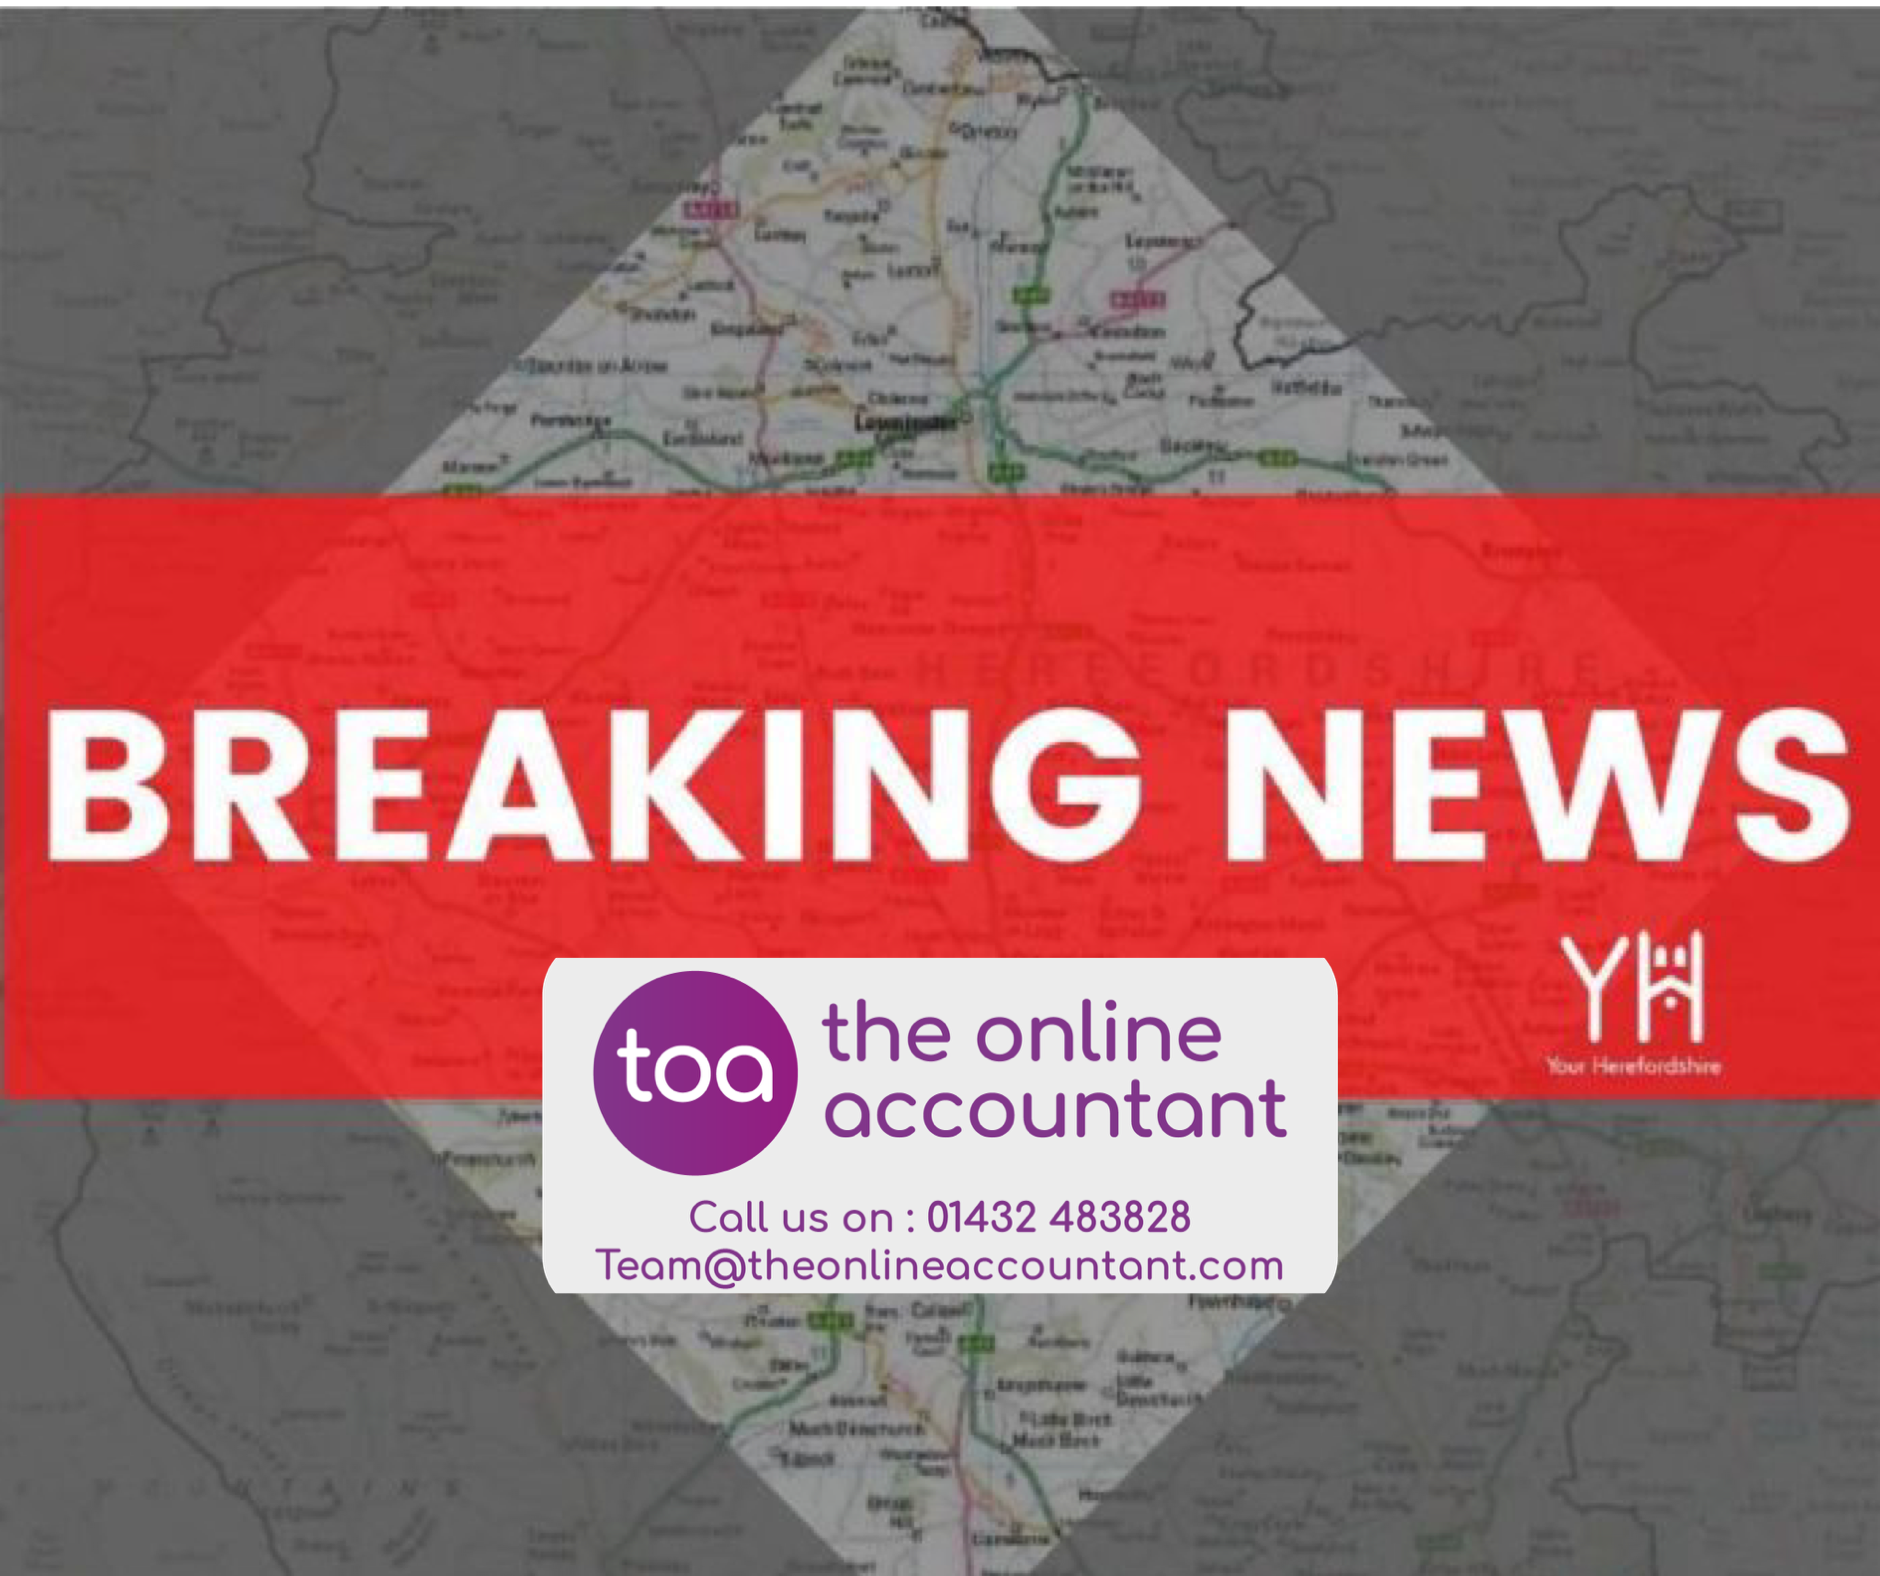 BREAKING | Hereford nursery closed after COVID-19 case is confirmed